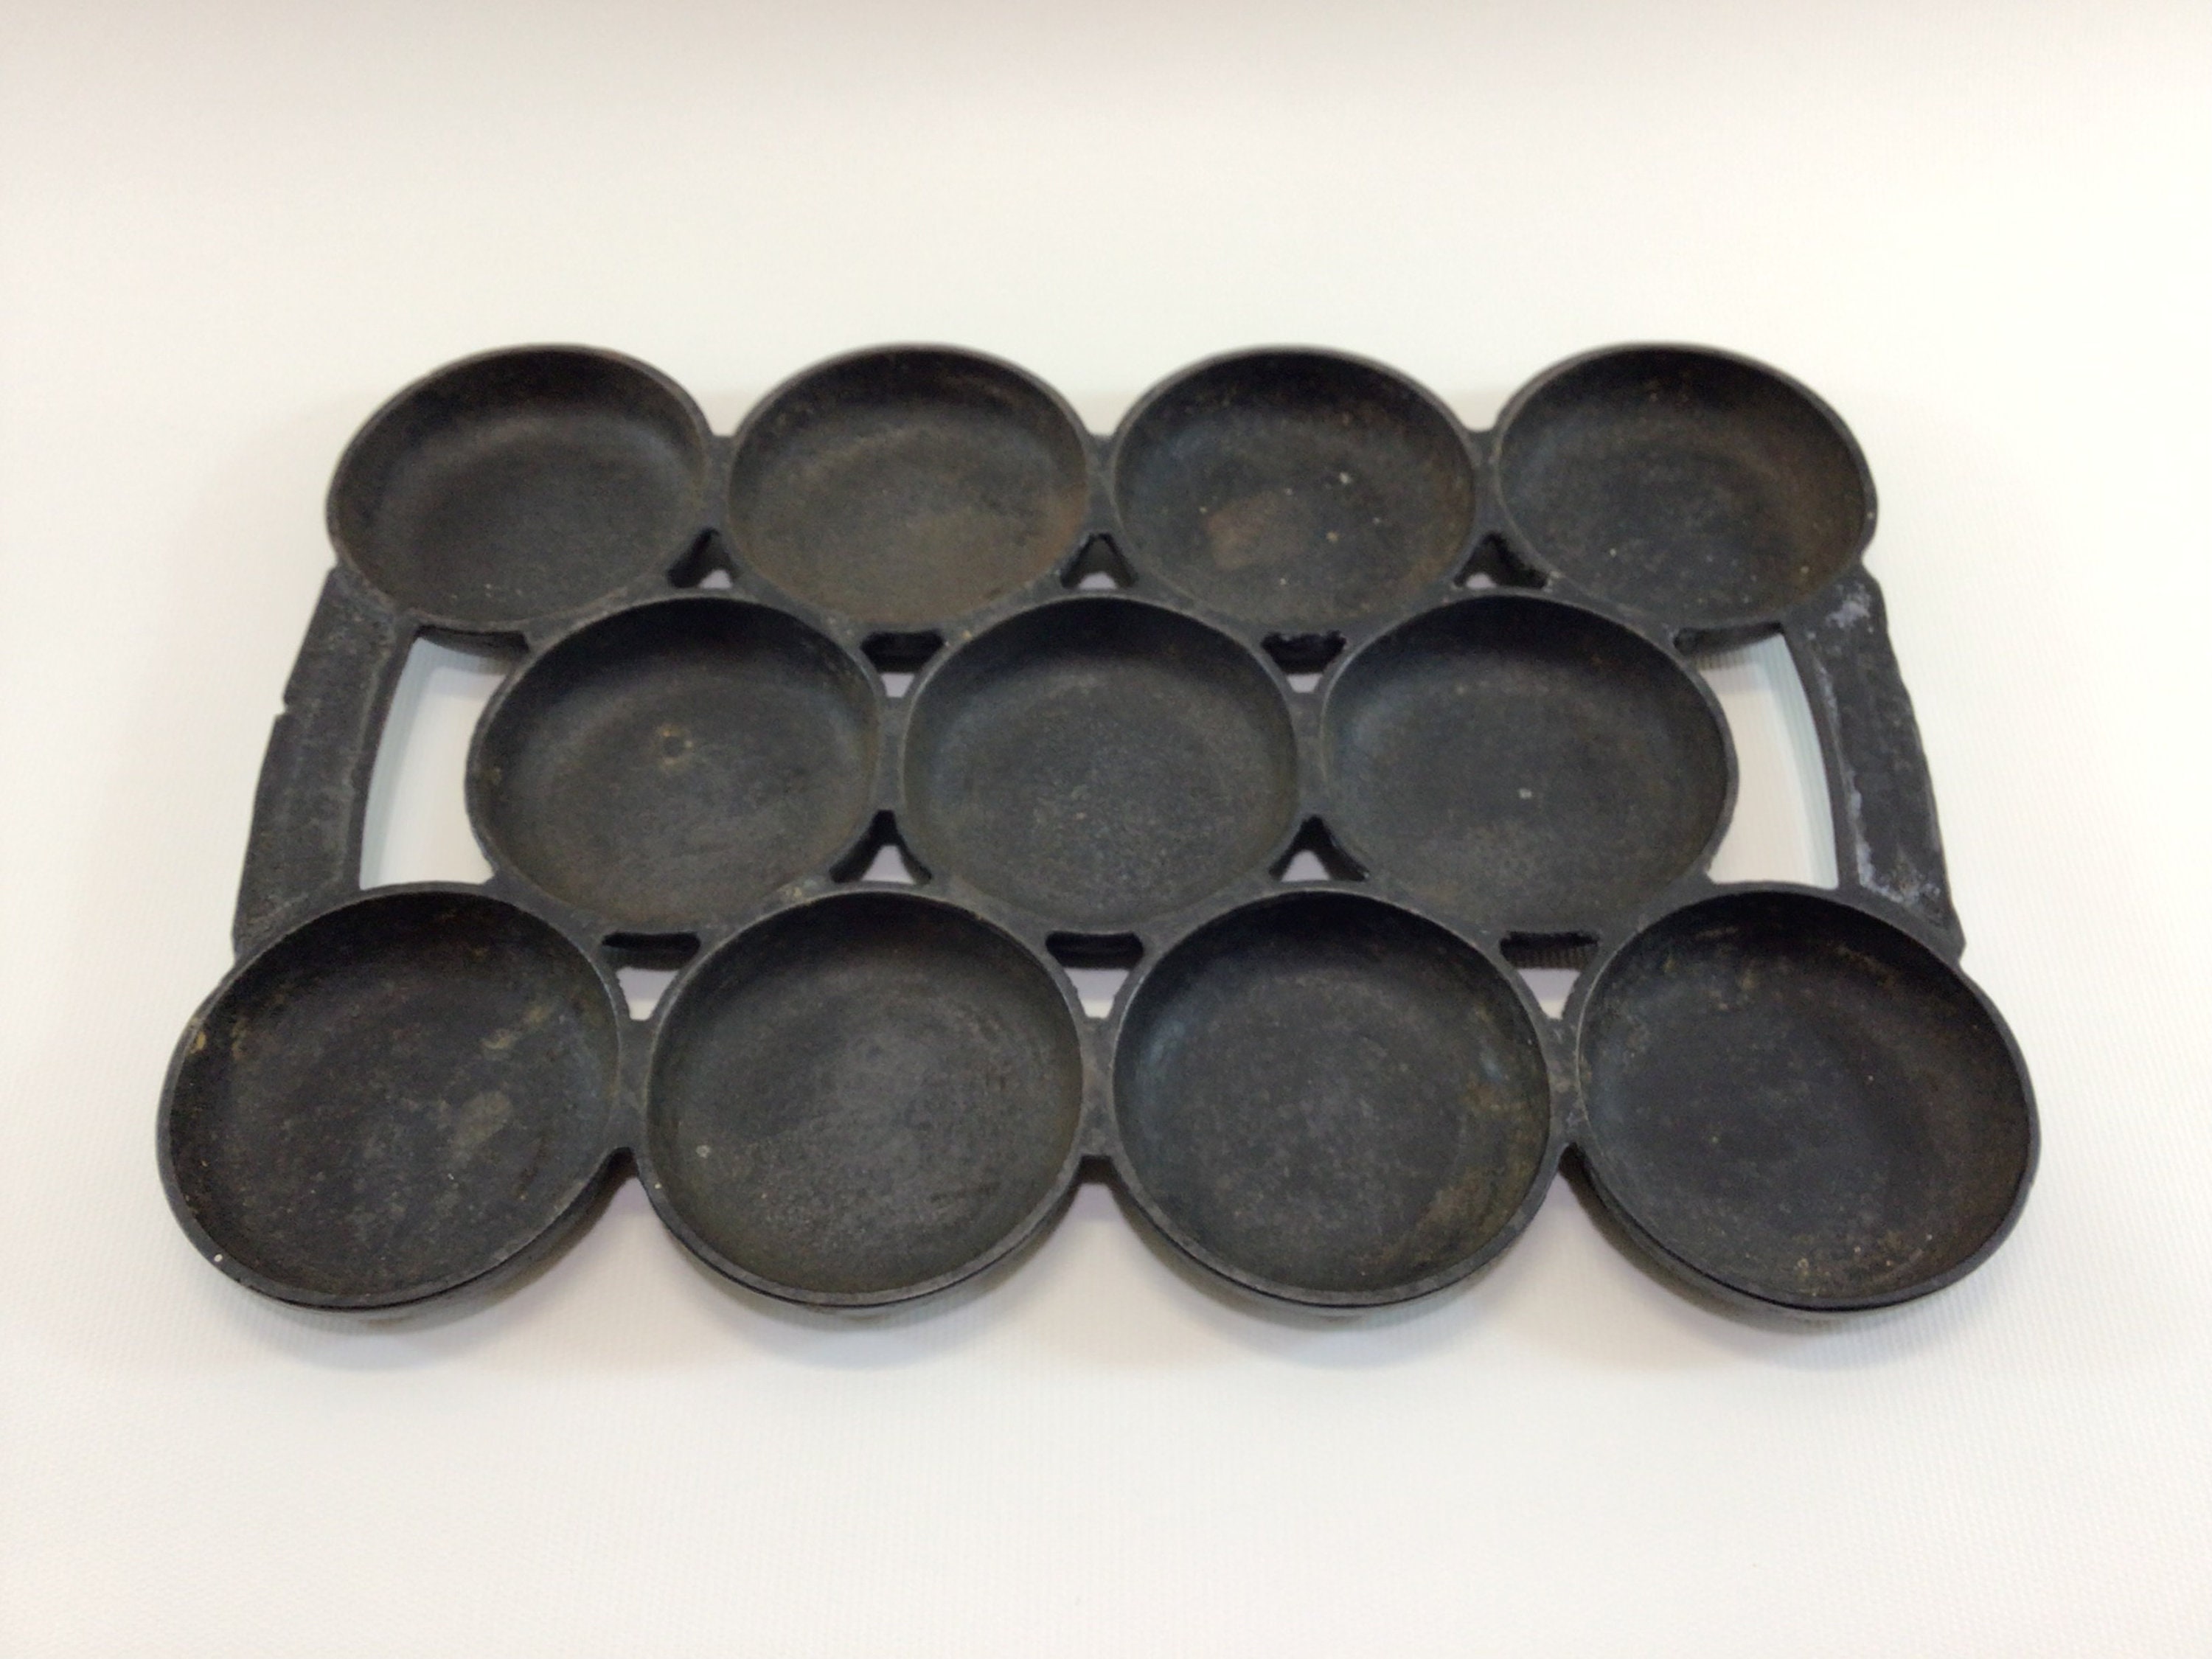 Latest Restores-Lodge Muffin Pan and Breadstick Pan. : r/castiron